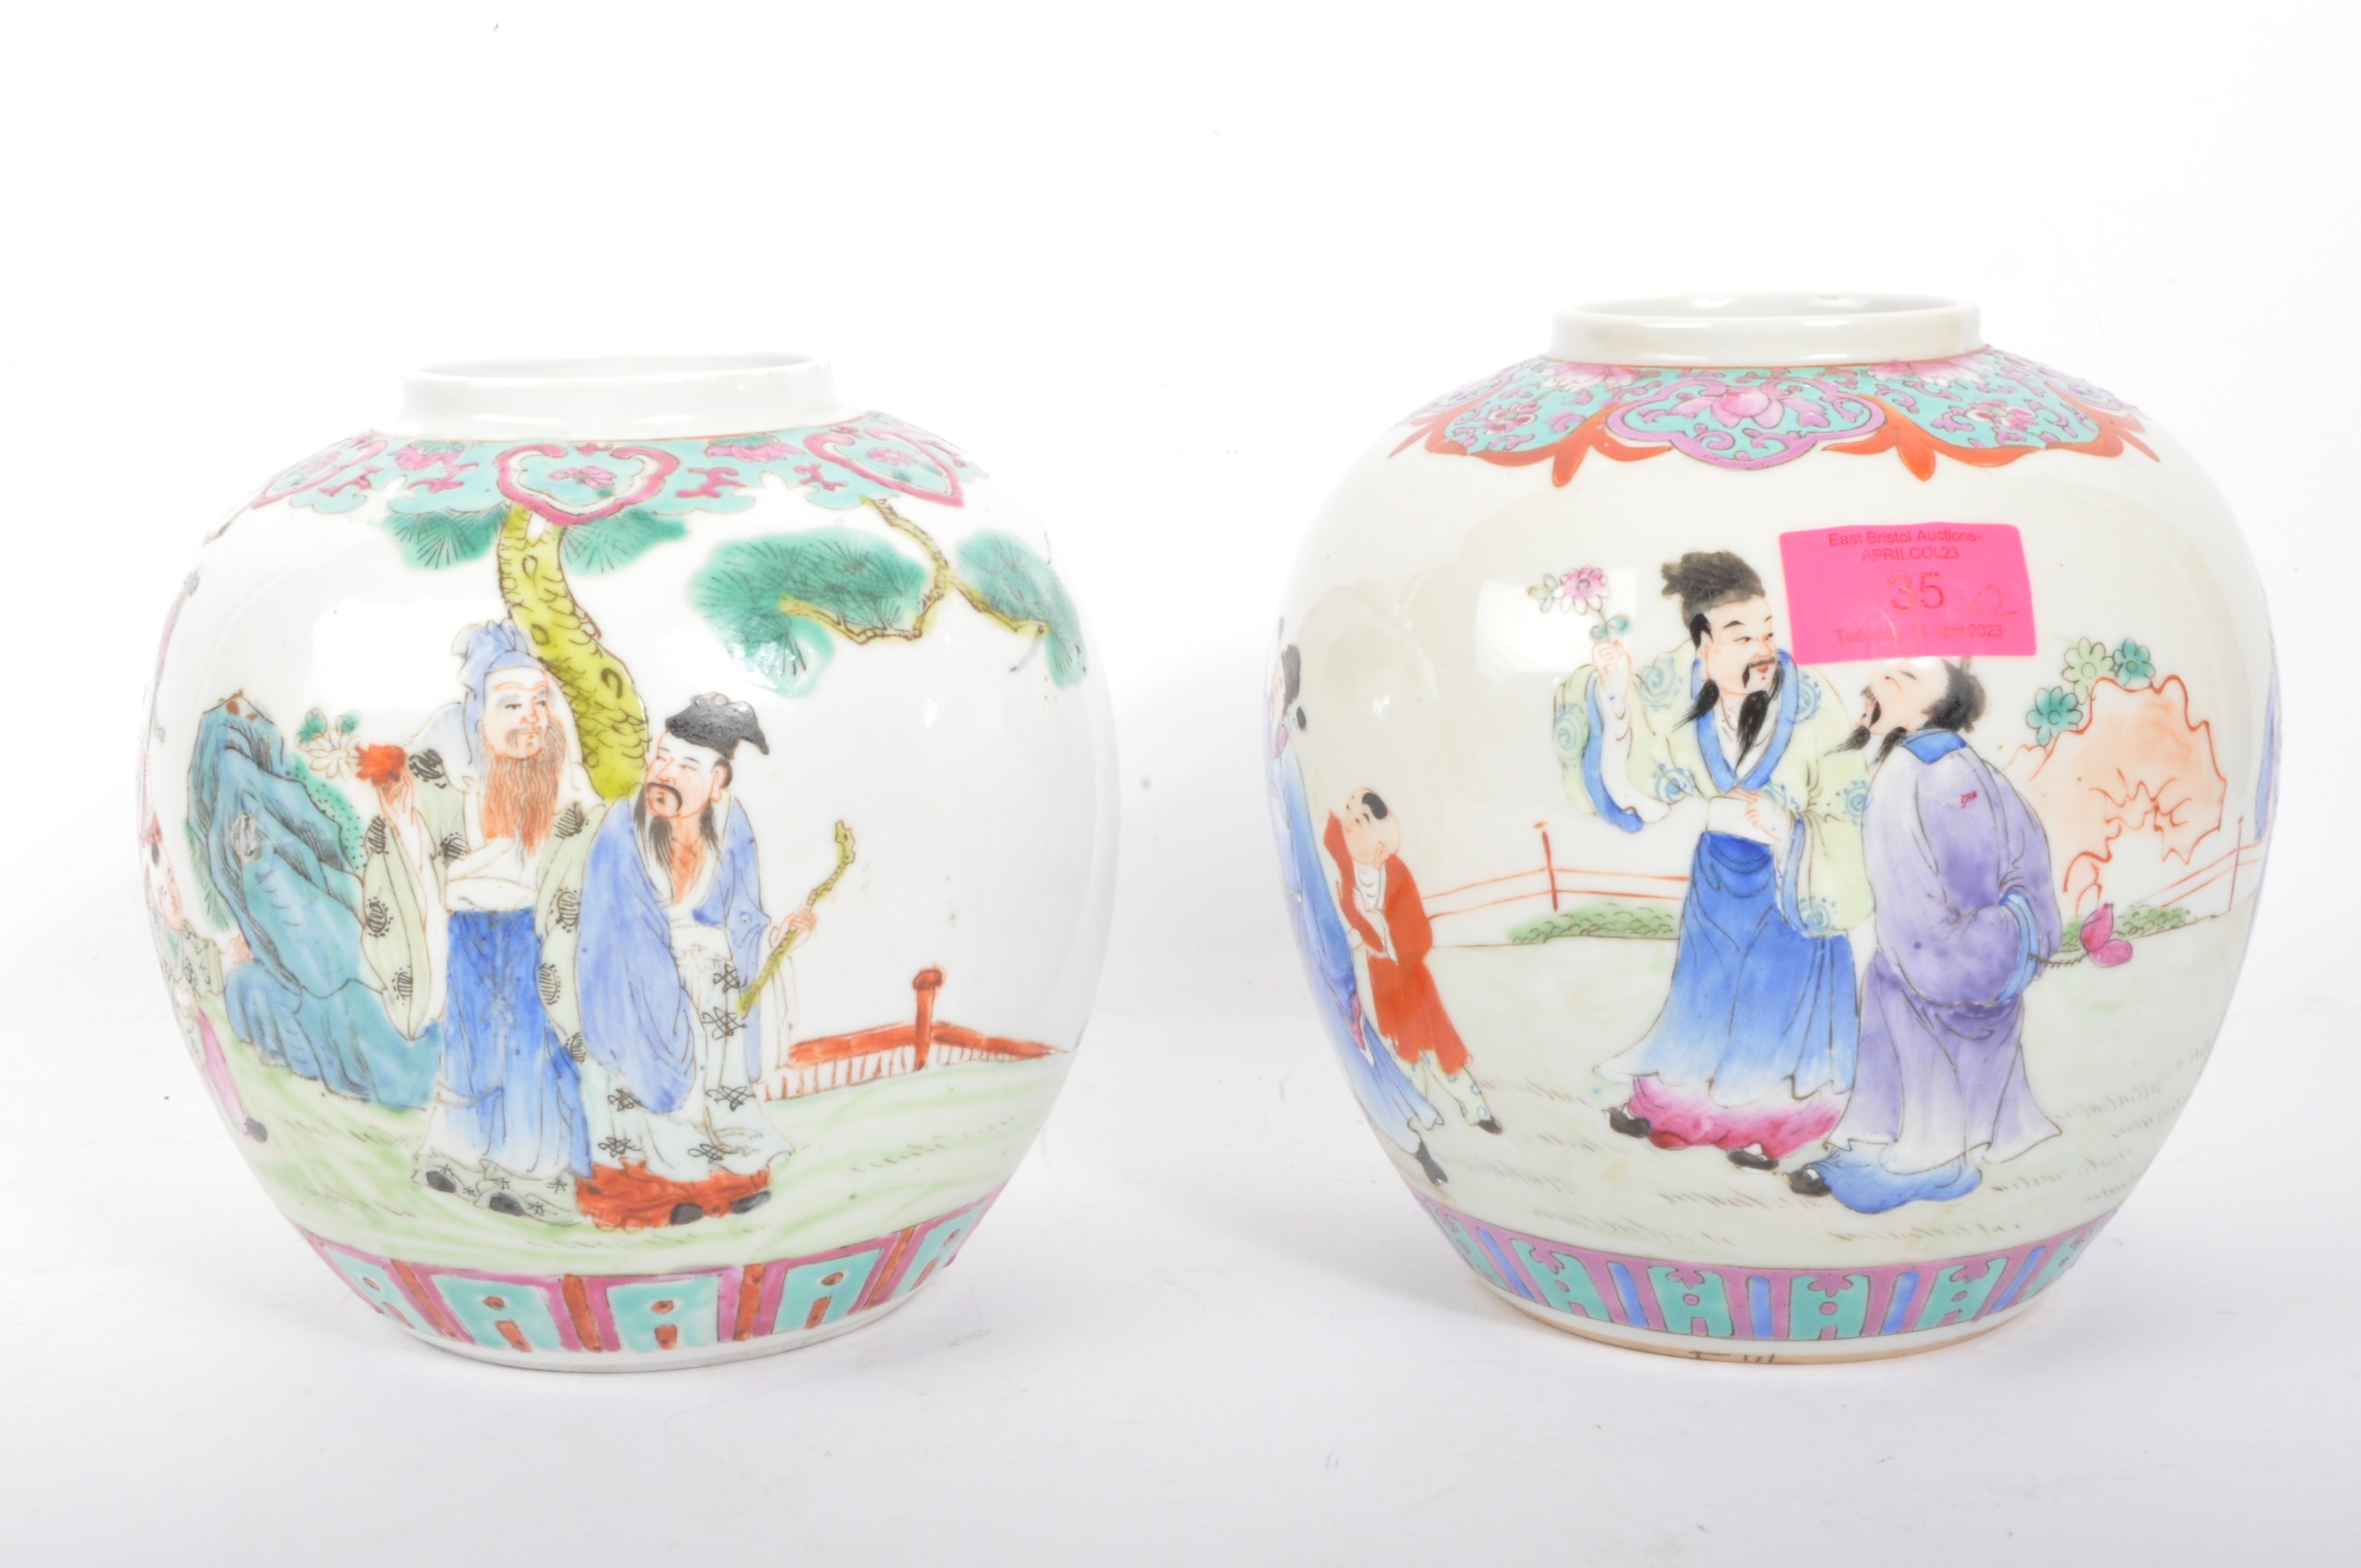 PAIR OF 19TH CENTURY CHINESE FAMILLE ROSE PORCELAIN GINGER JARS